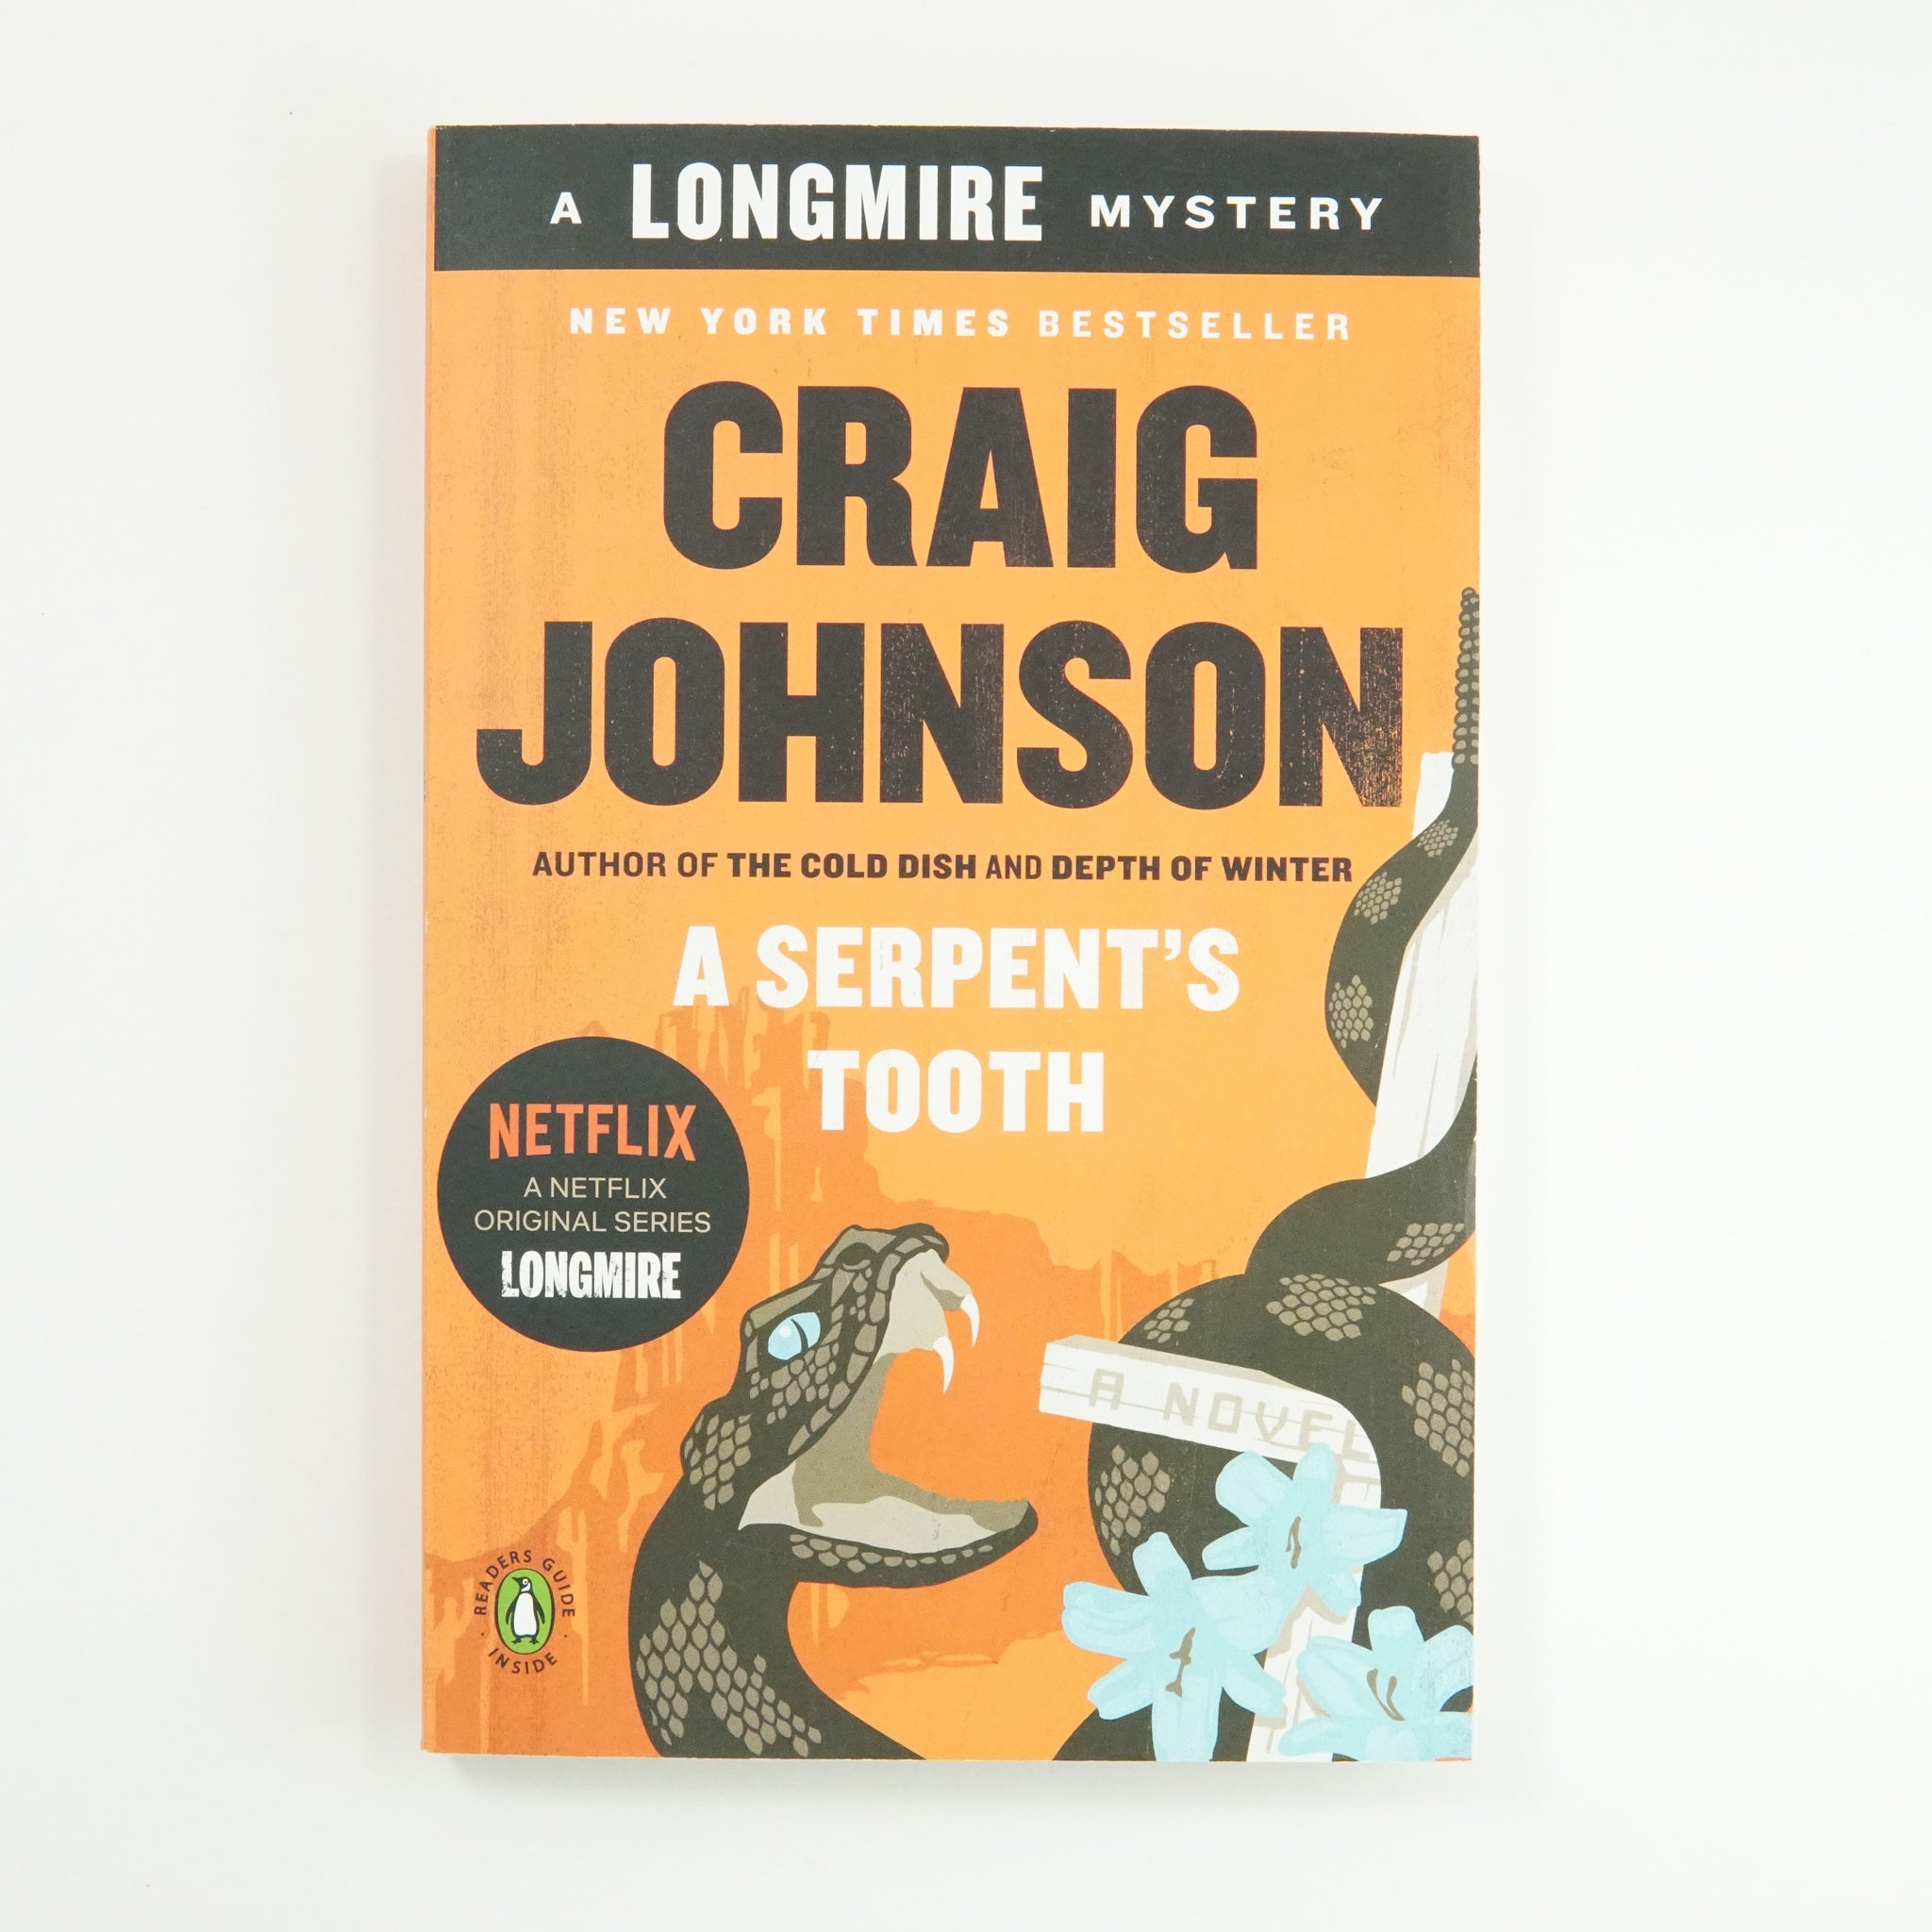 BK 5 A SERPENT'S TOOTH BY CRAIG JOHNSON #21045759